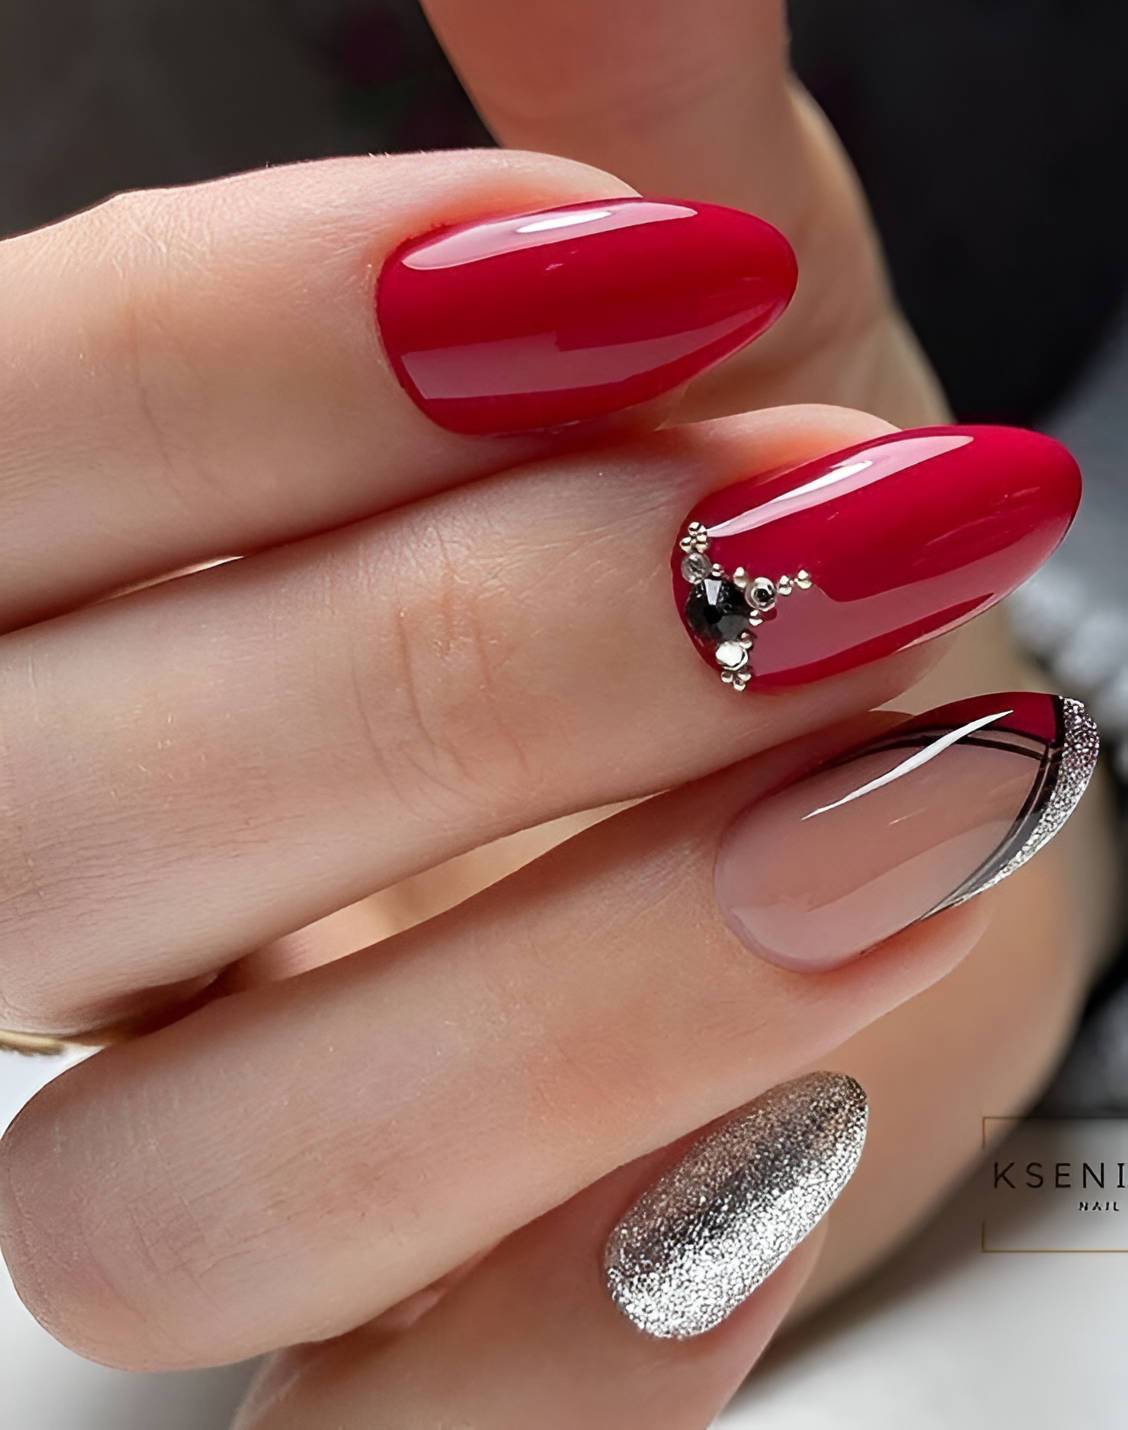 27 Glamorous Red Manicures To Make You Irresistible - 209